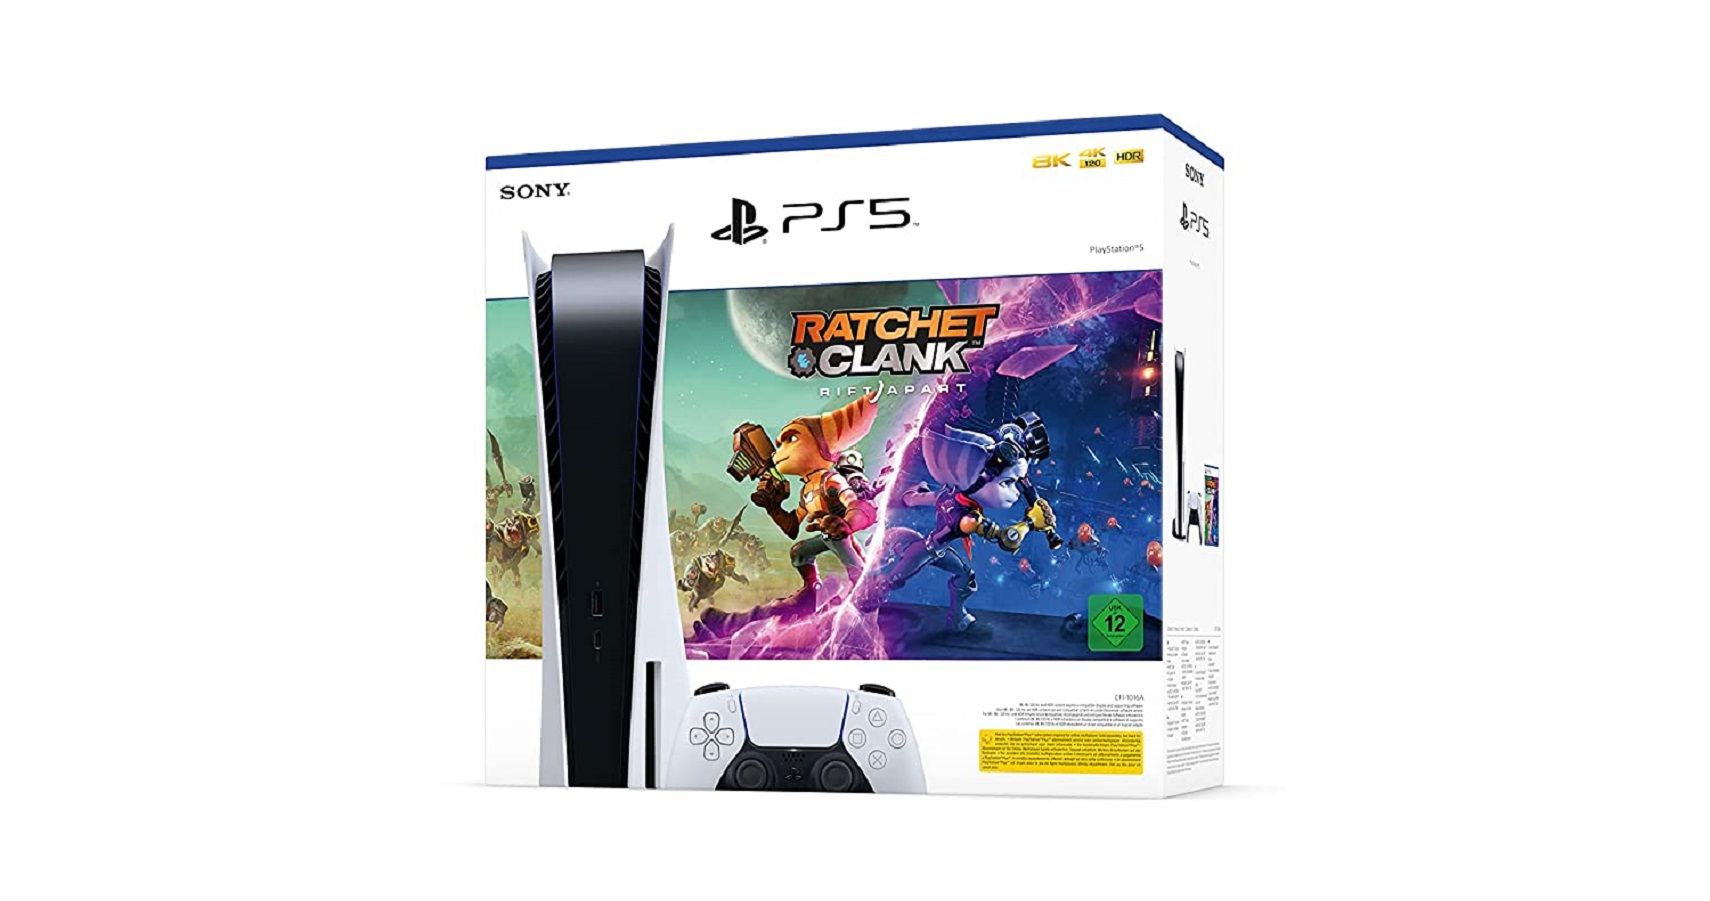 PS5's Ratchet & Clank bundle is on sale in France and coming to the UK